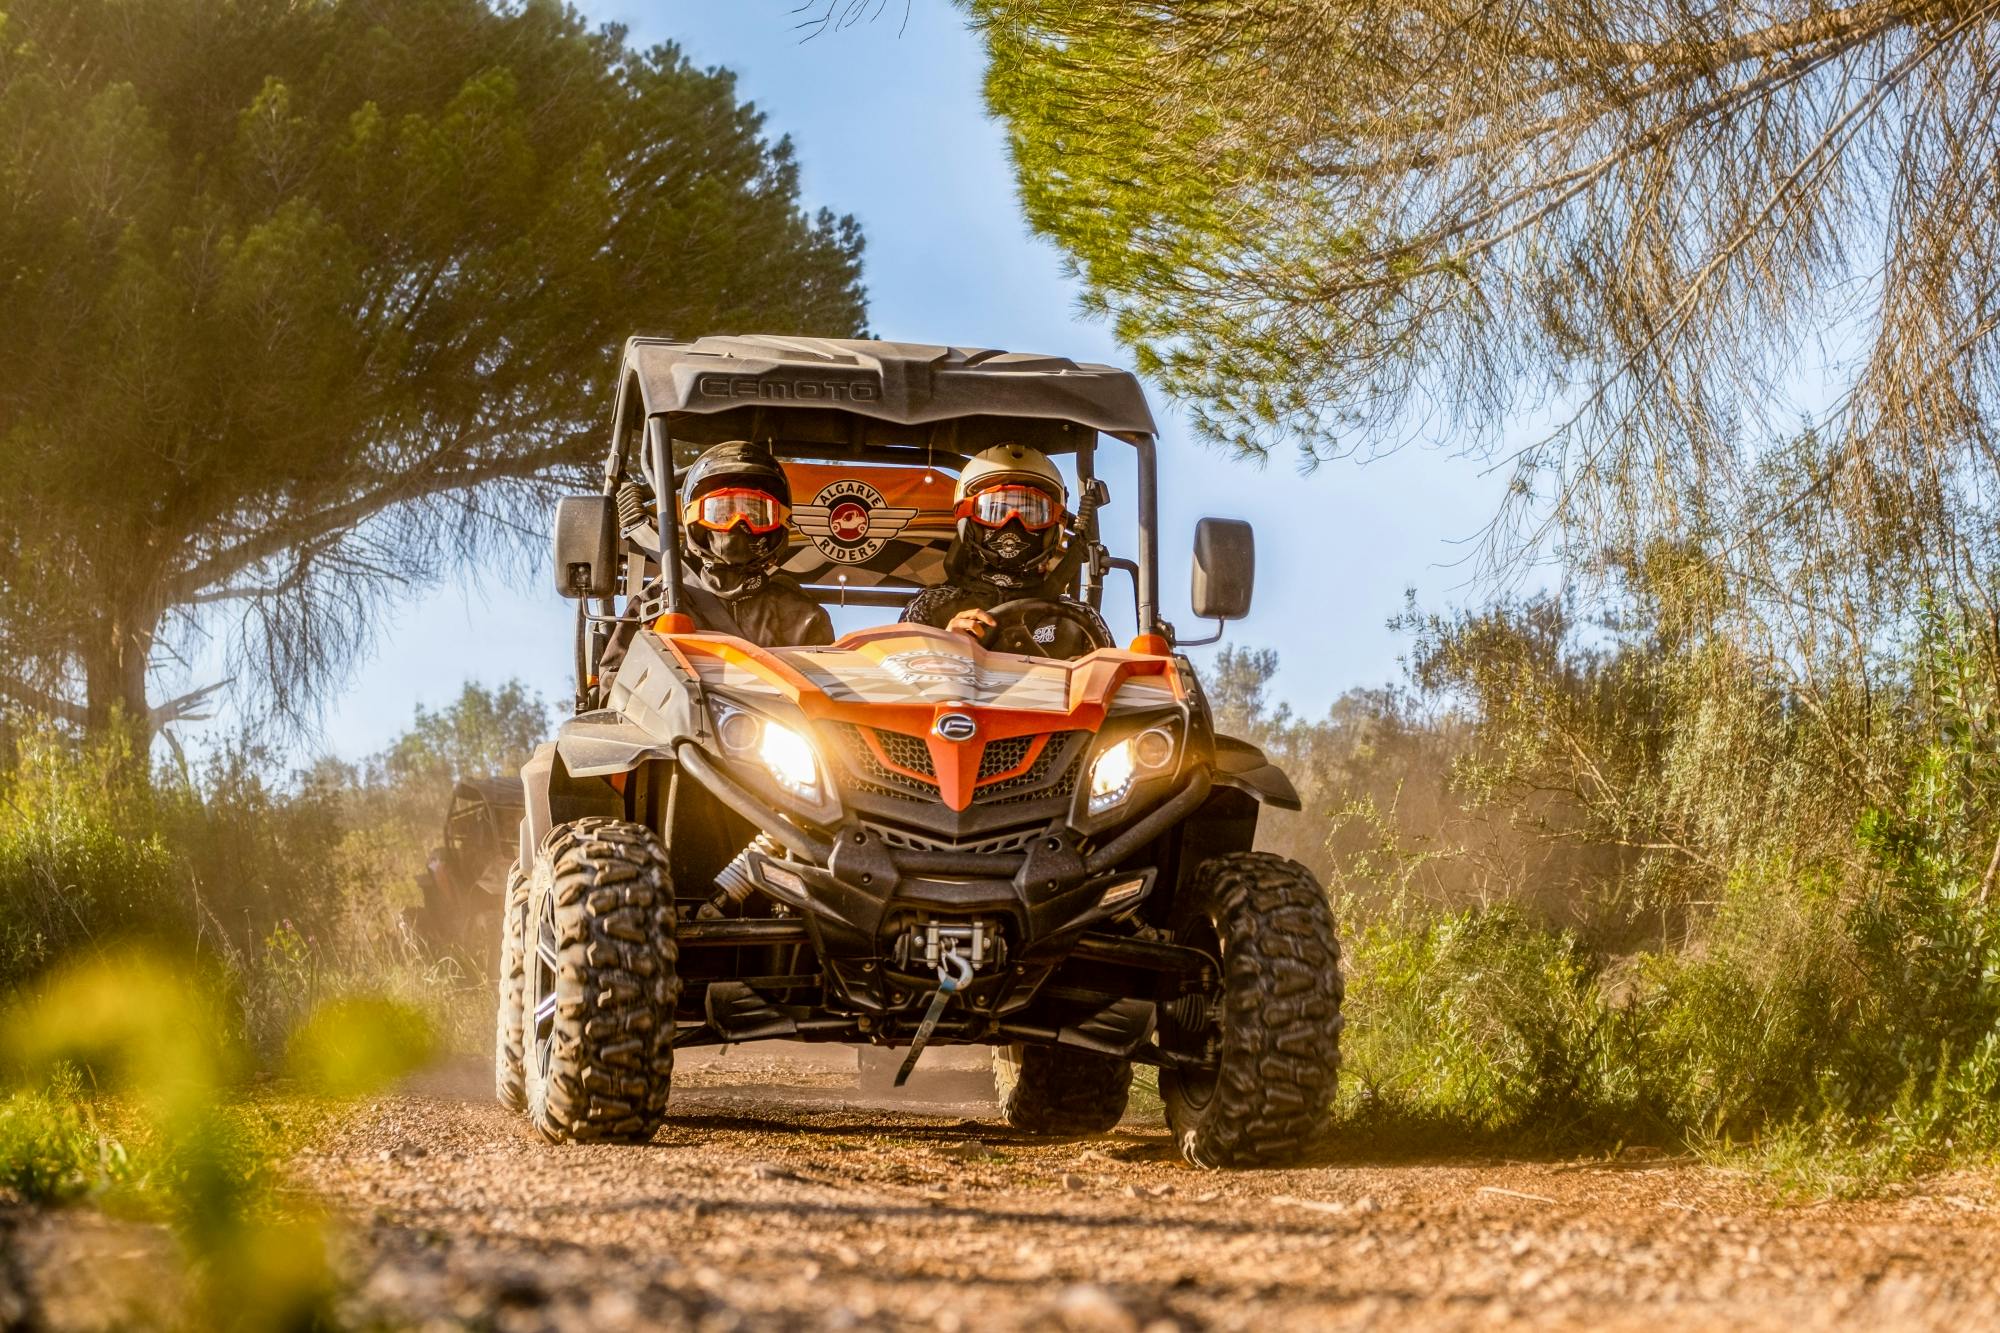 Buggy tour experience in Algarve